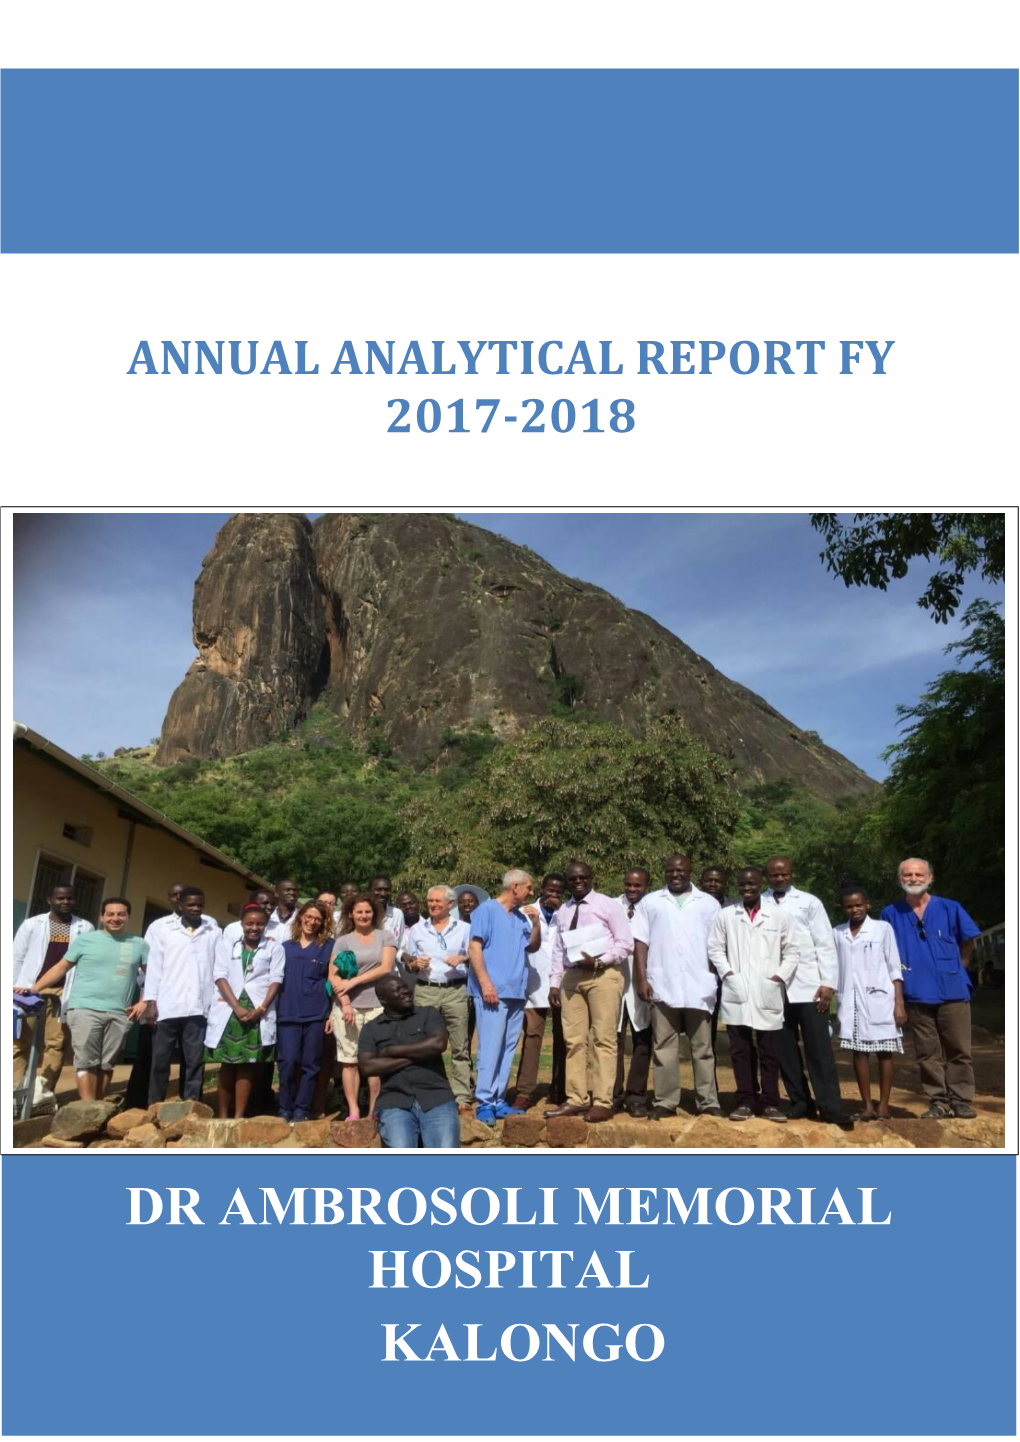 Annual Analytical Report Fy 2017-2018